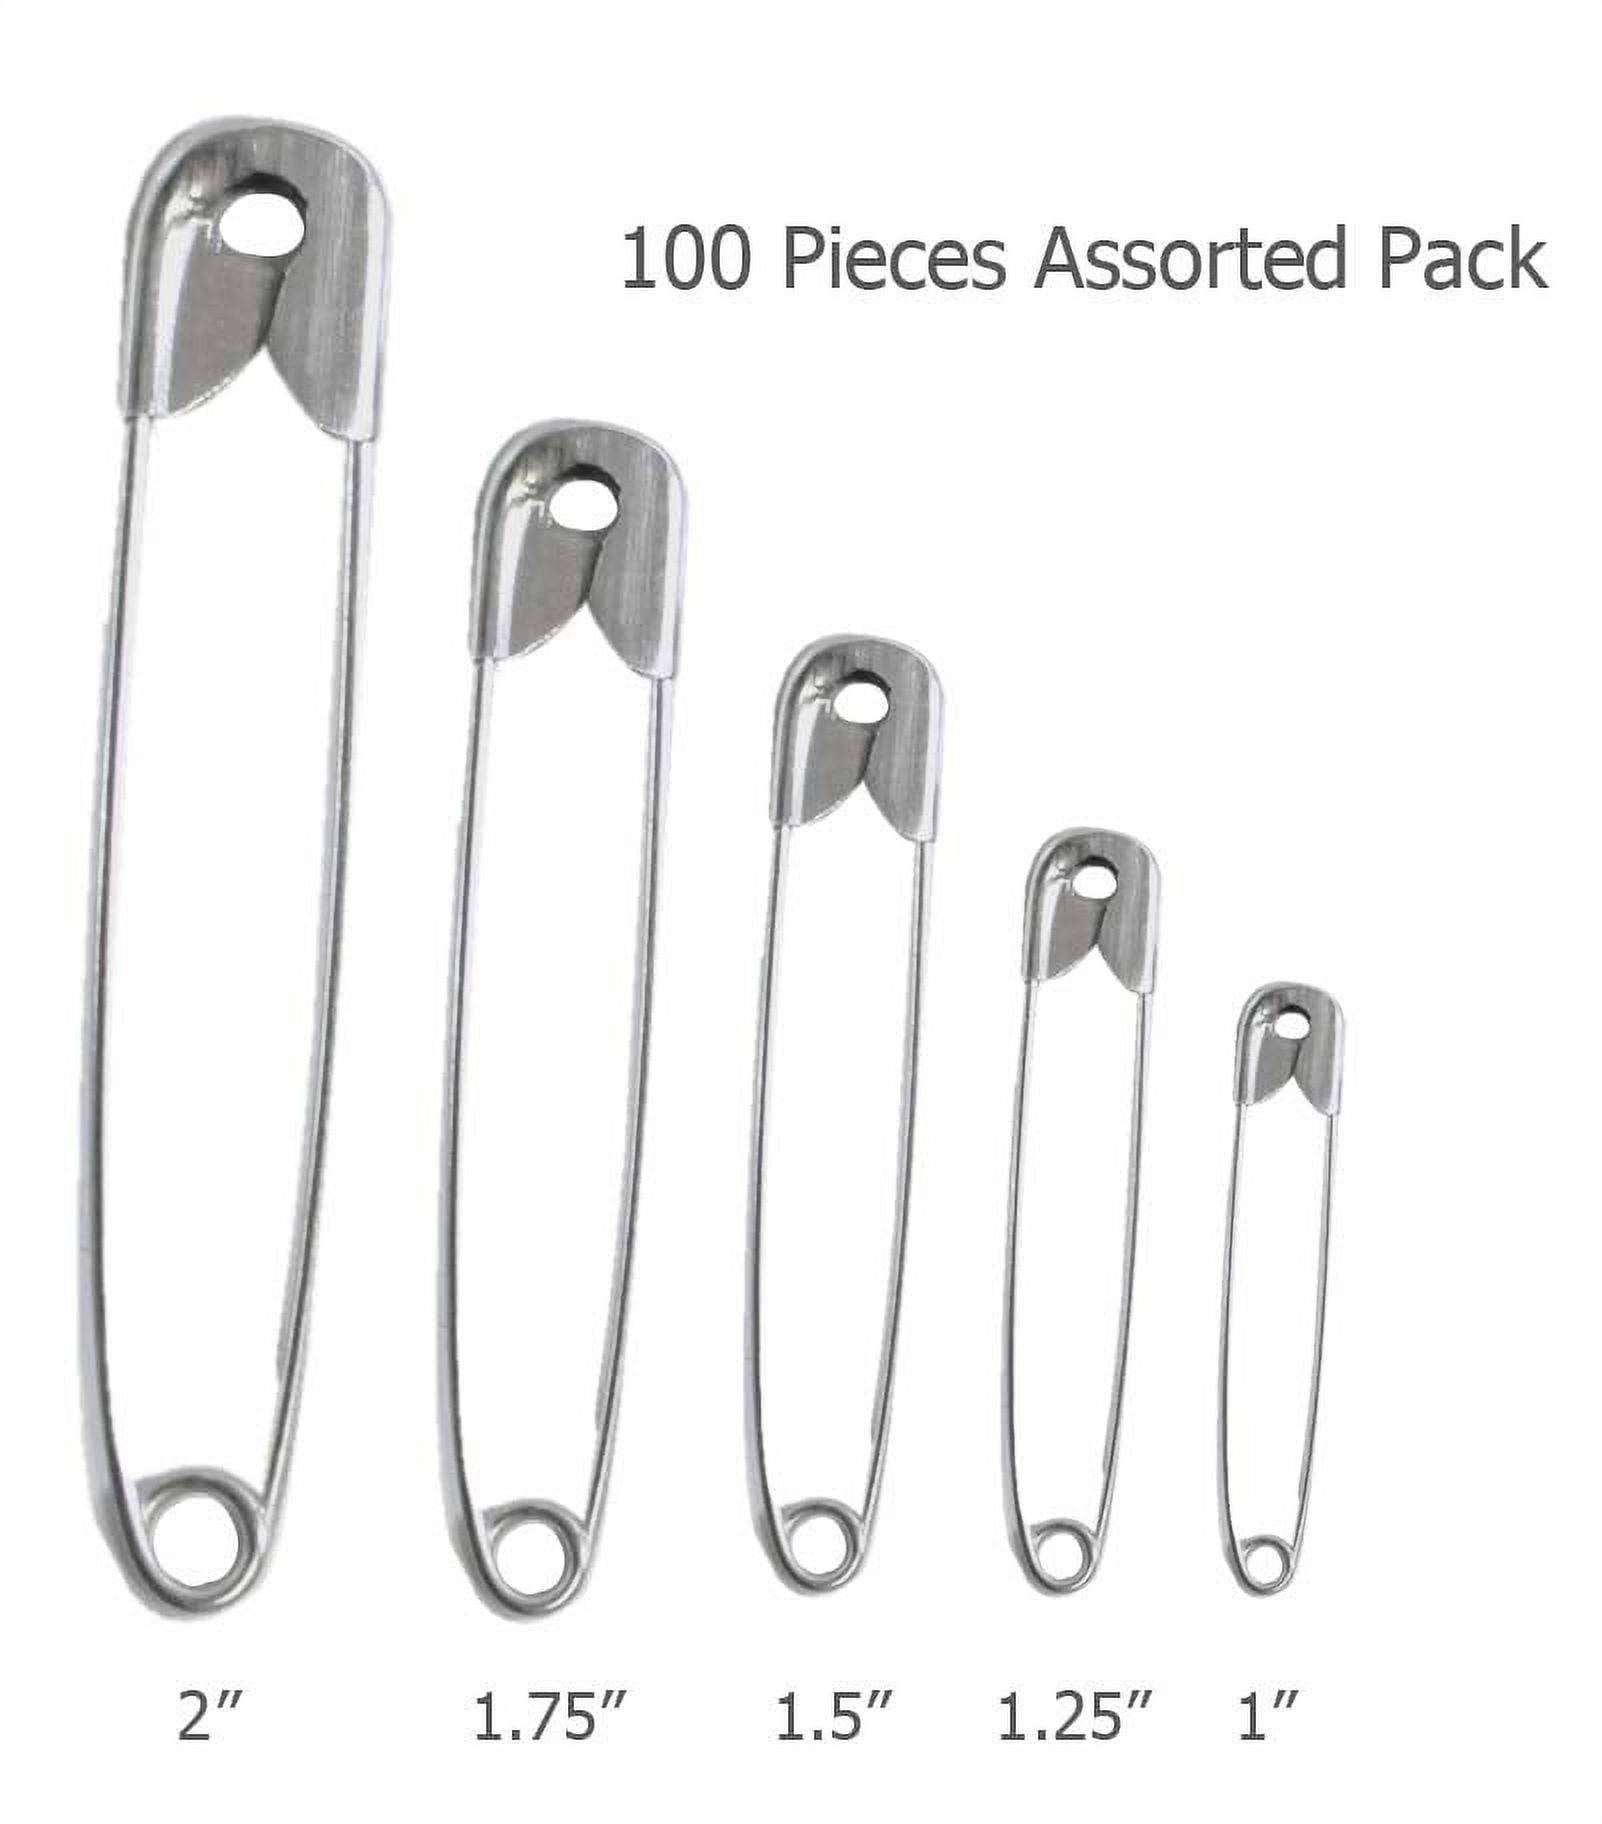 Mr. Pen- Safety Pins, Safety Pins Assorted, 600 Pack, 3 Colors, Assorted Safety Pins, Safety Pin, Small Safety Pins, Safety Pins Bulk, Large Safety